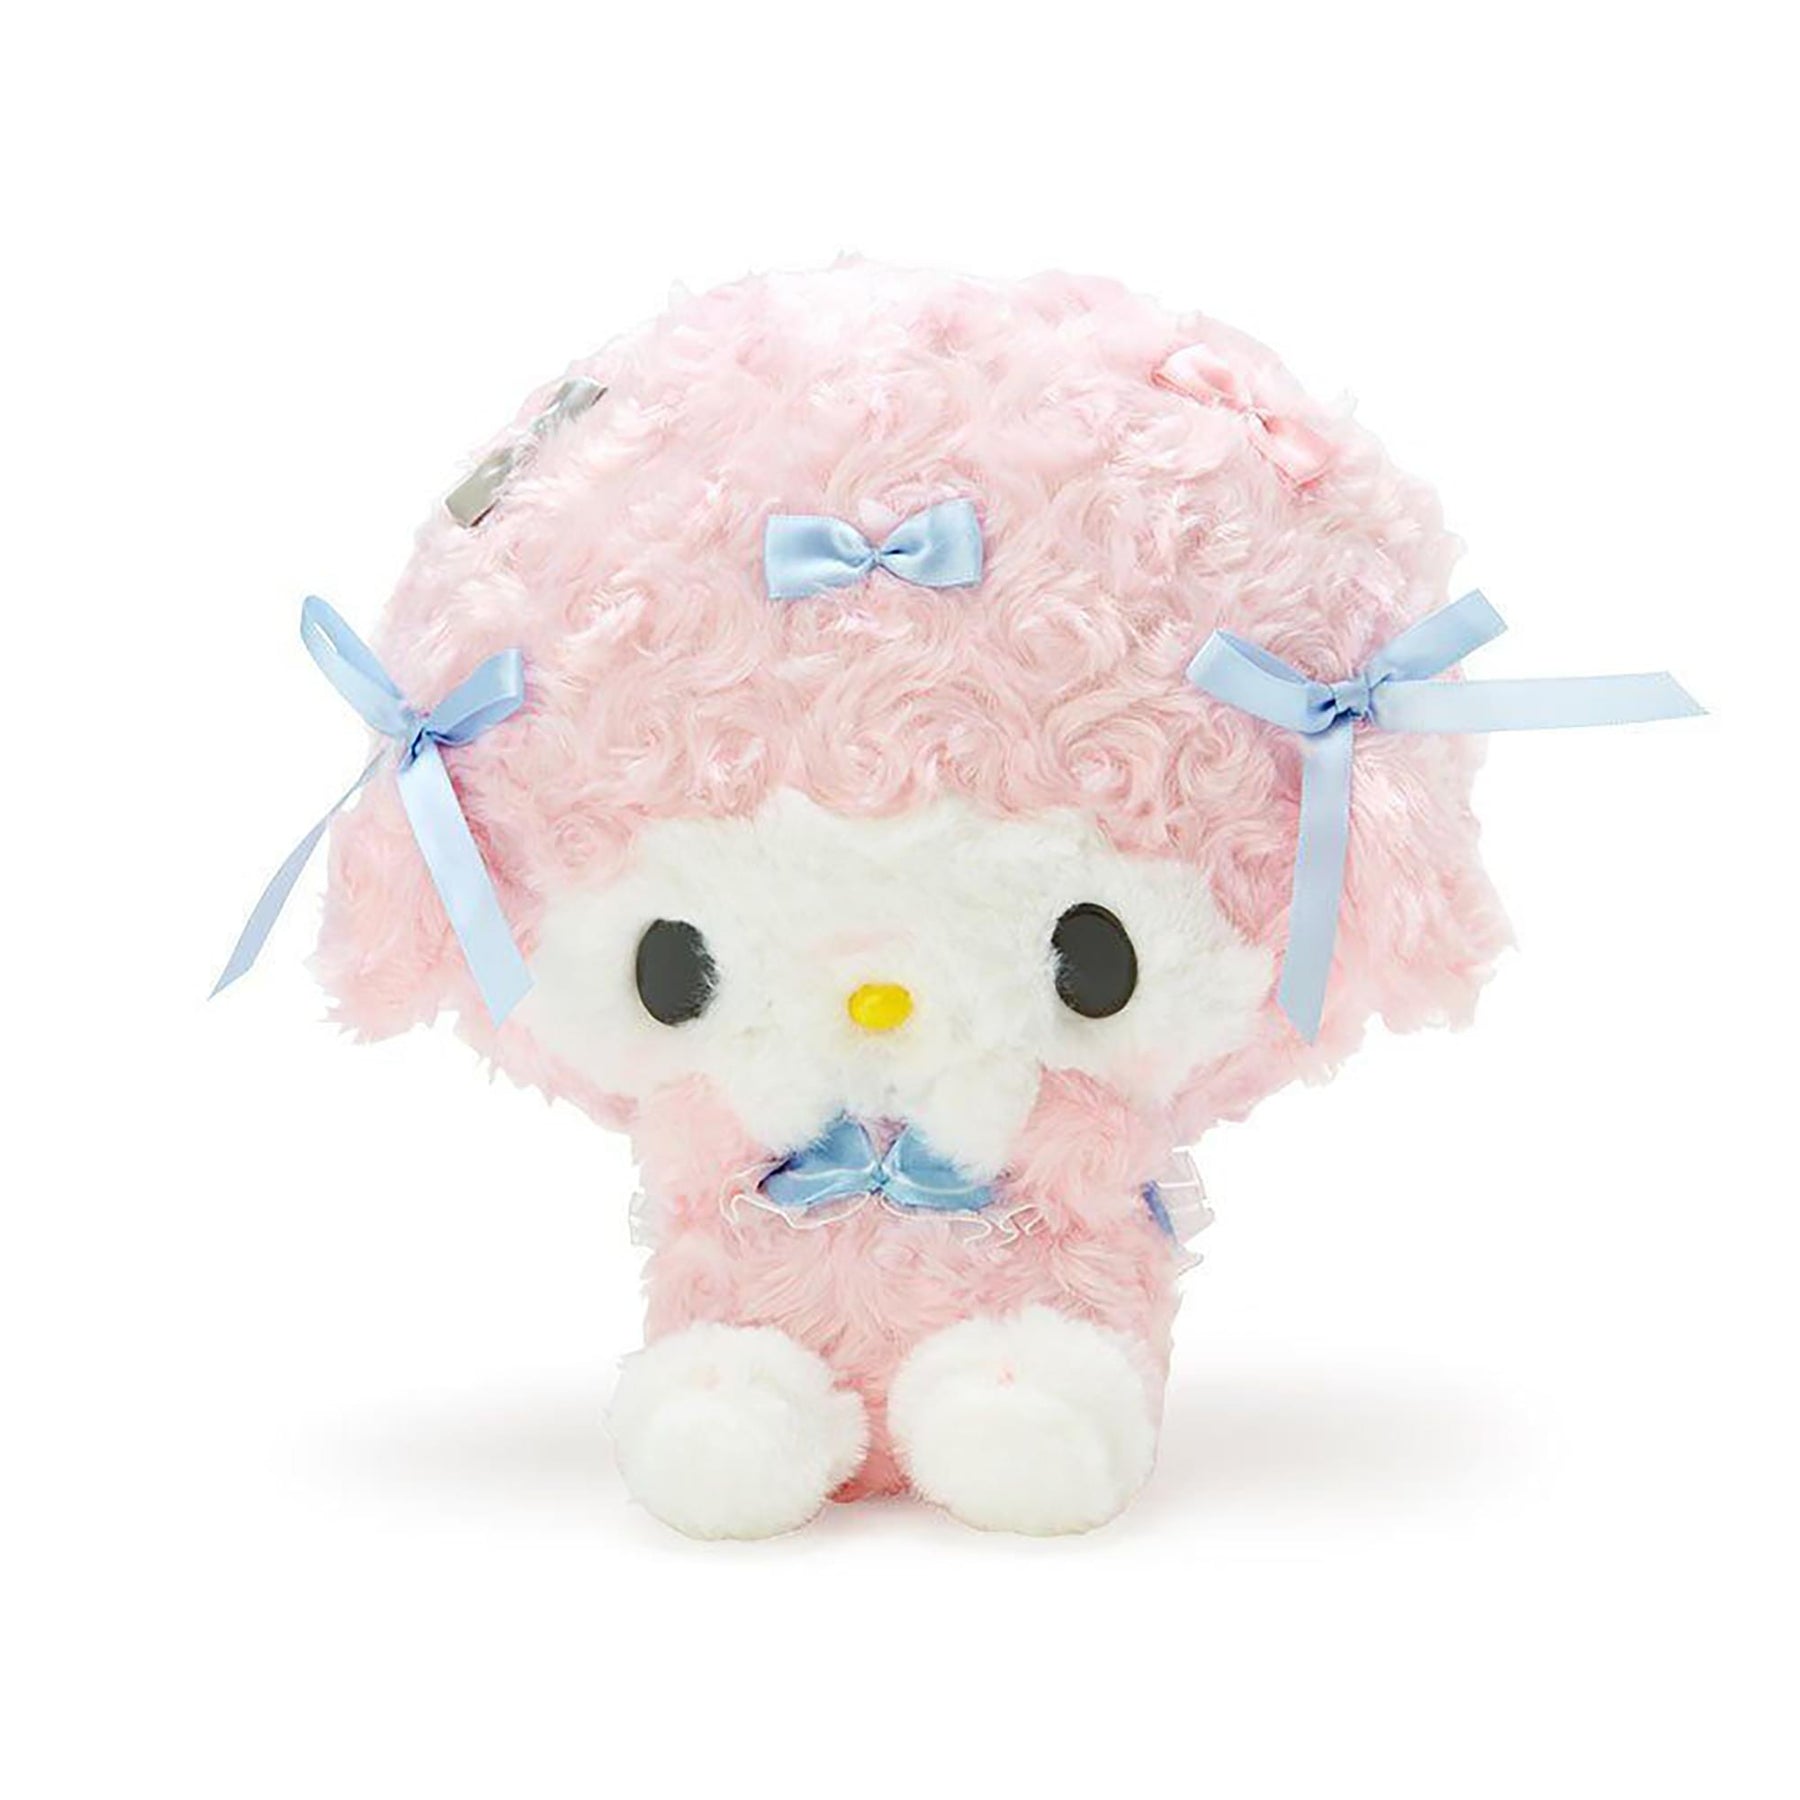 Sanrio My Sweet Piano 9 Inch Plush with Magnets